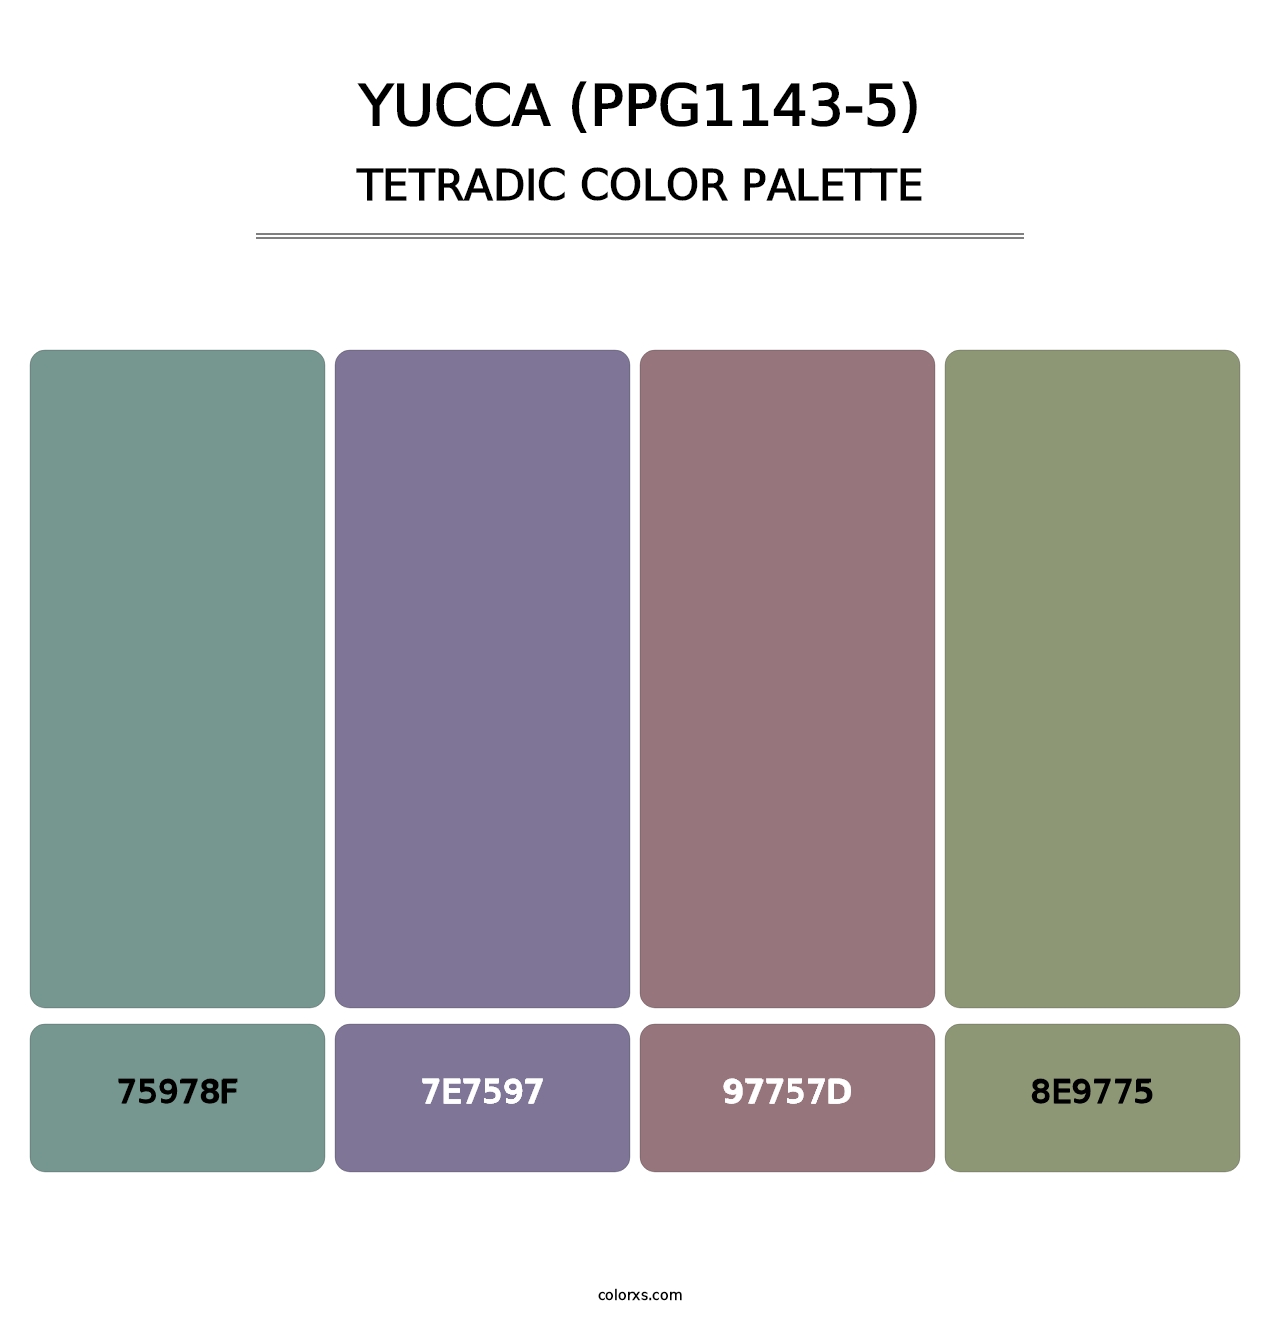 Yucca (PPG1143-5) - Tetradic Color Palette